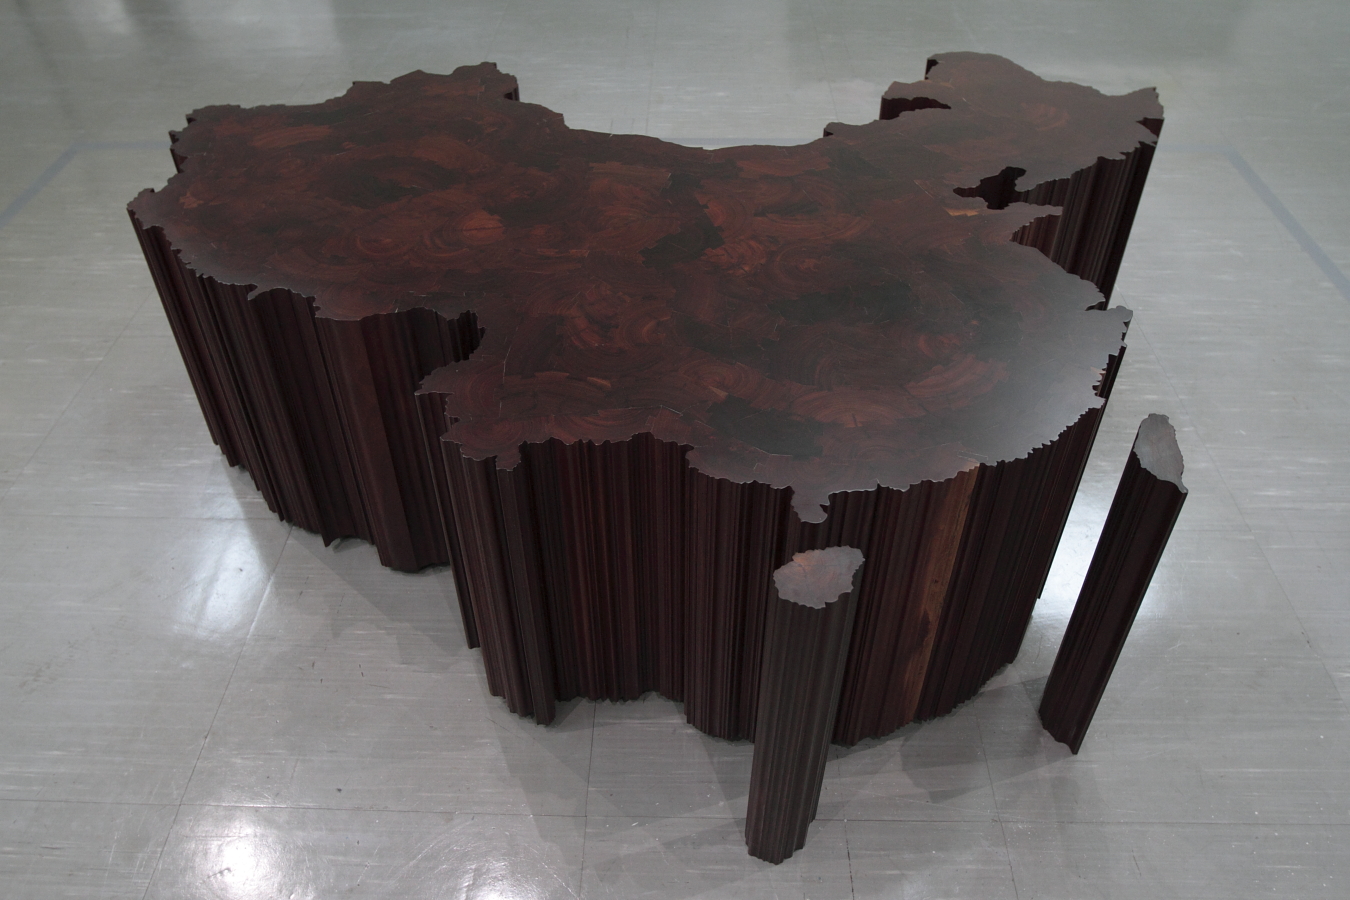 Tieli wood from dismantled temples of the Qing Dynasty (1644-1911)  | Map of China   150 x 150 x 50 cm    2004 的圖說